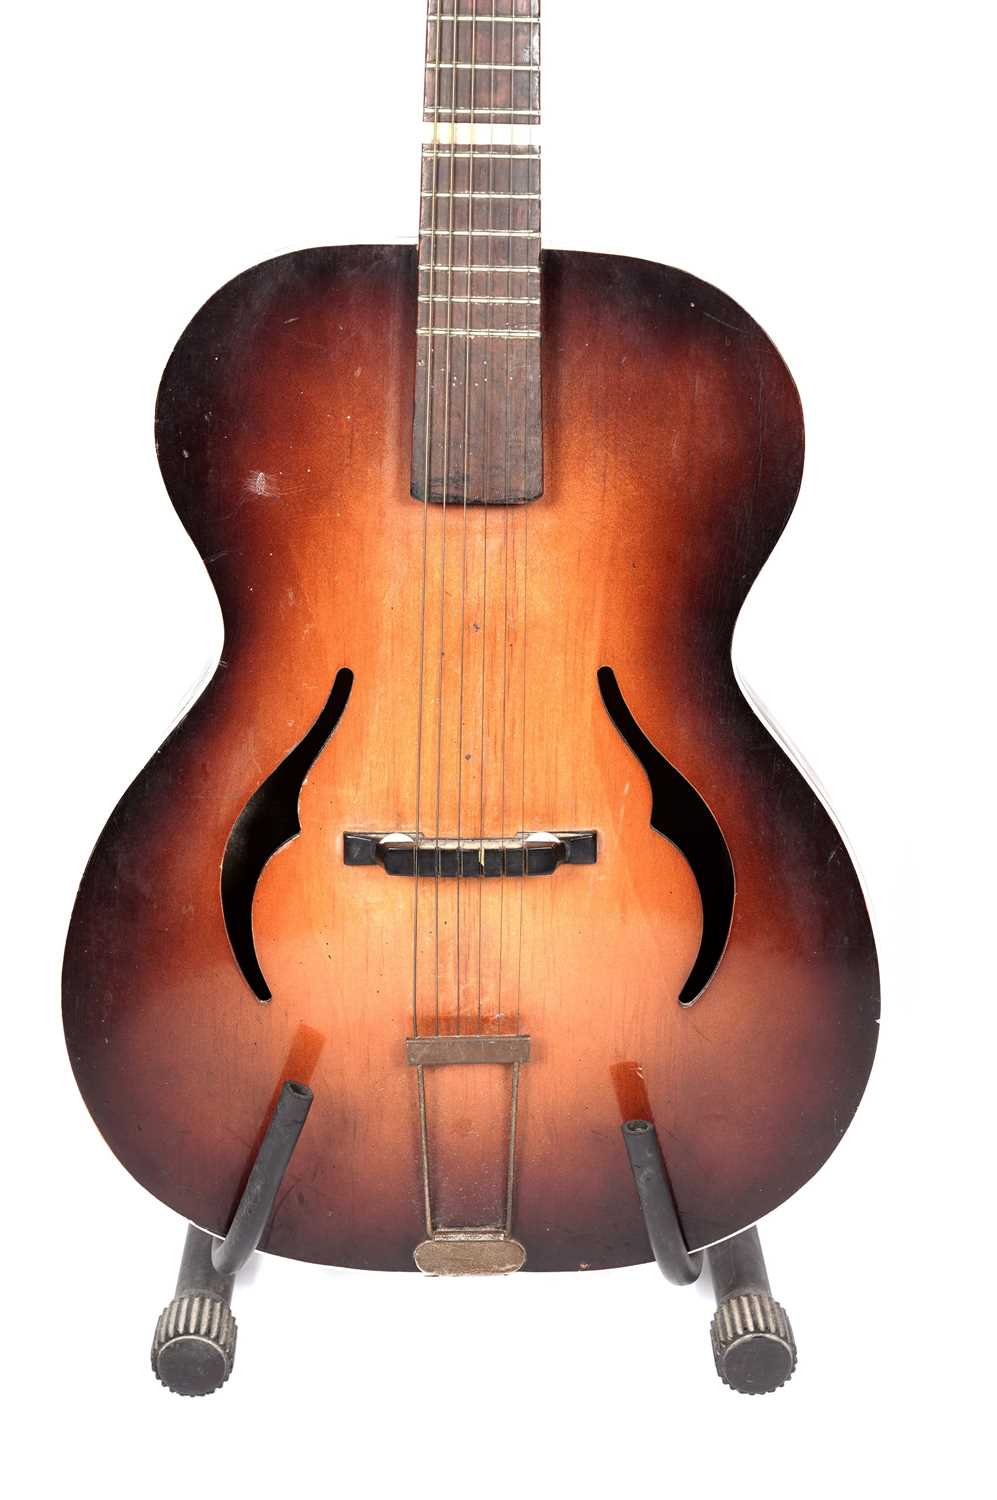 Two 1950's cello-bodied acoustic guitars - Image 4 of 7